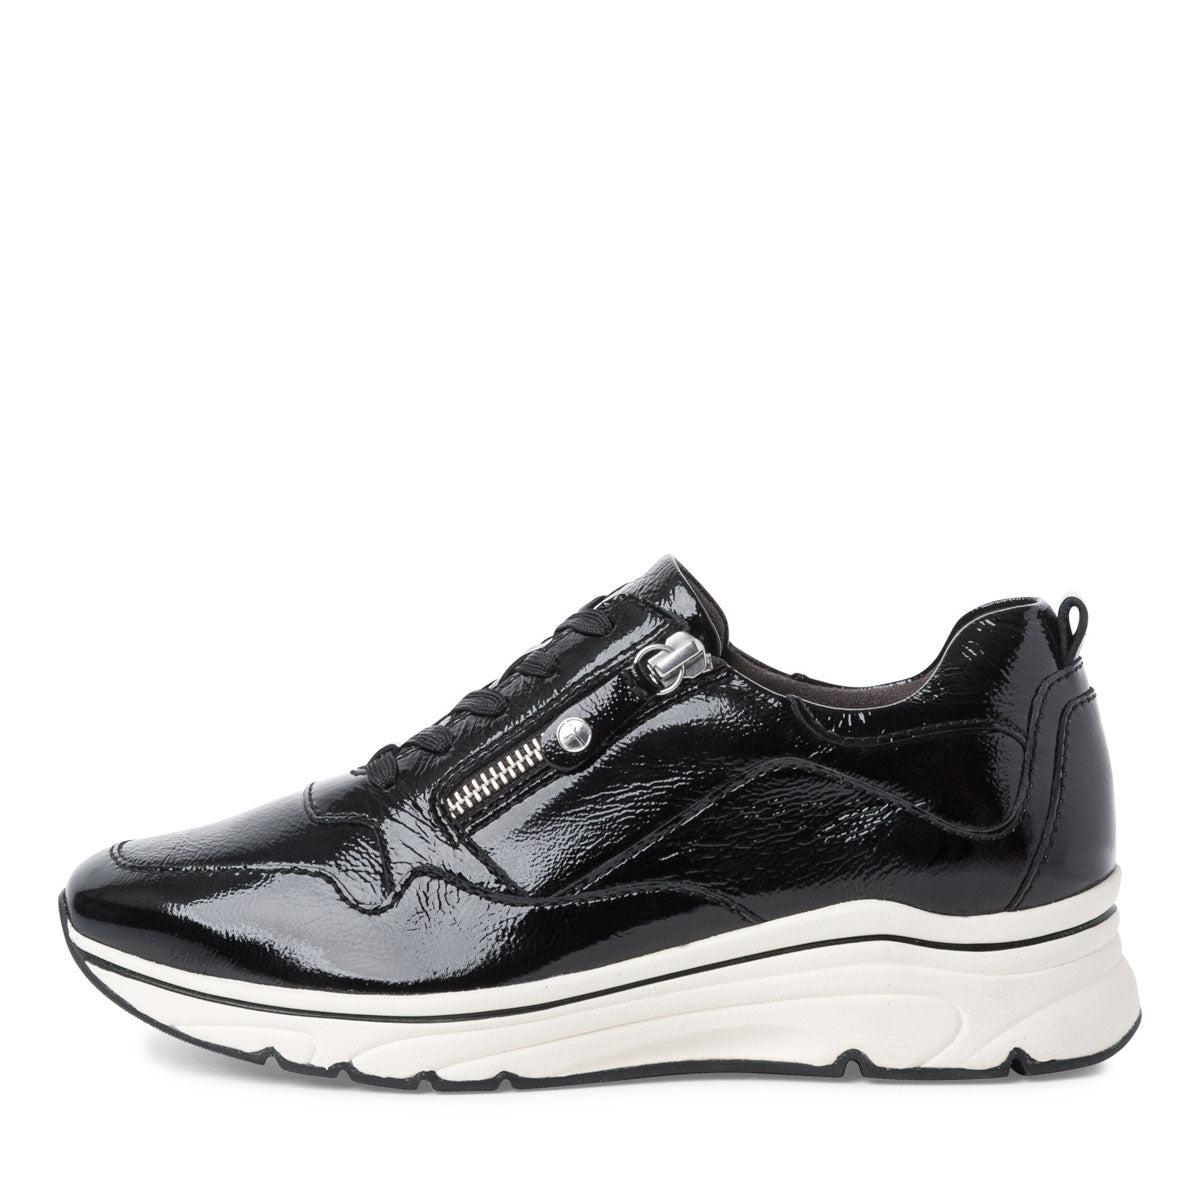 Runner High Lace-Up Shoes in Black Patent